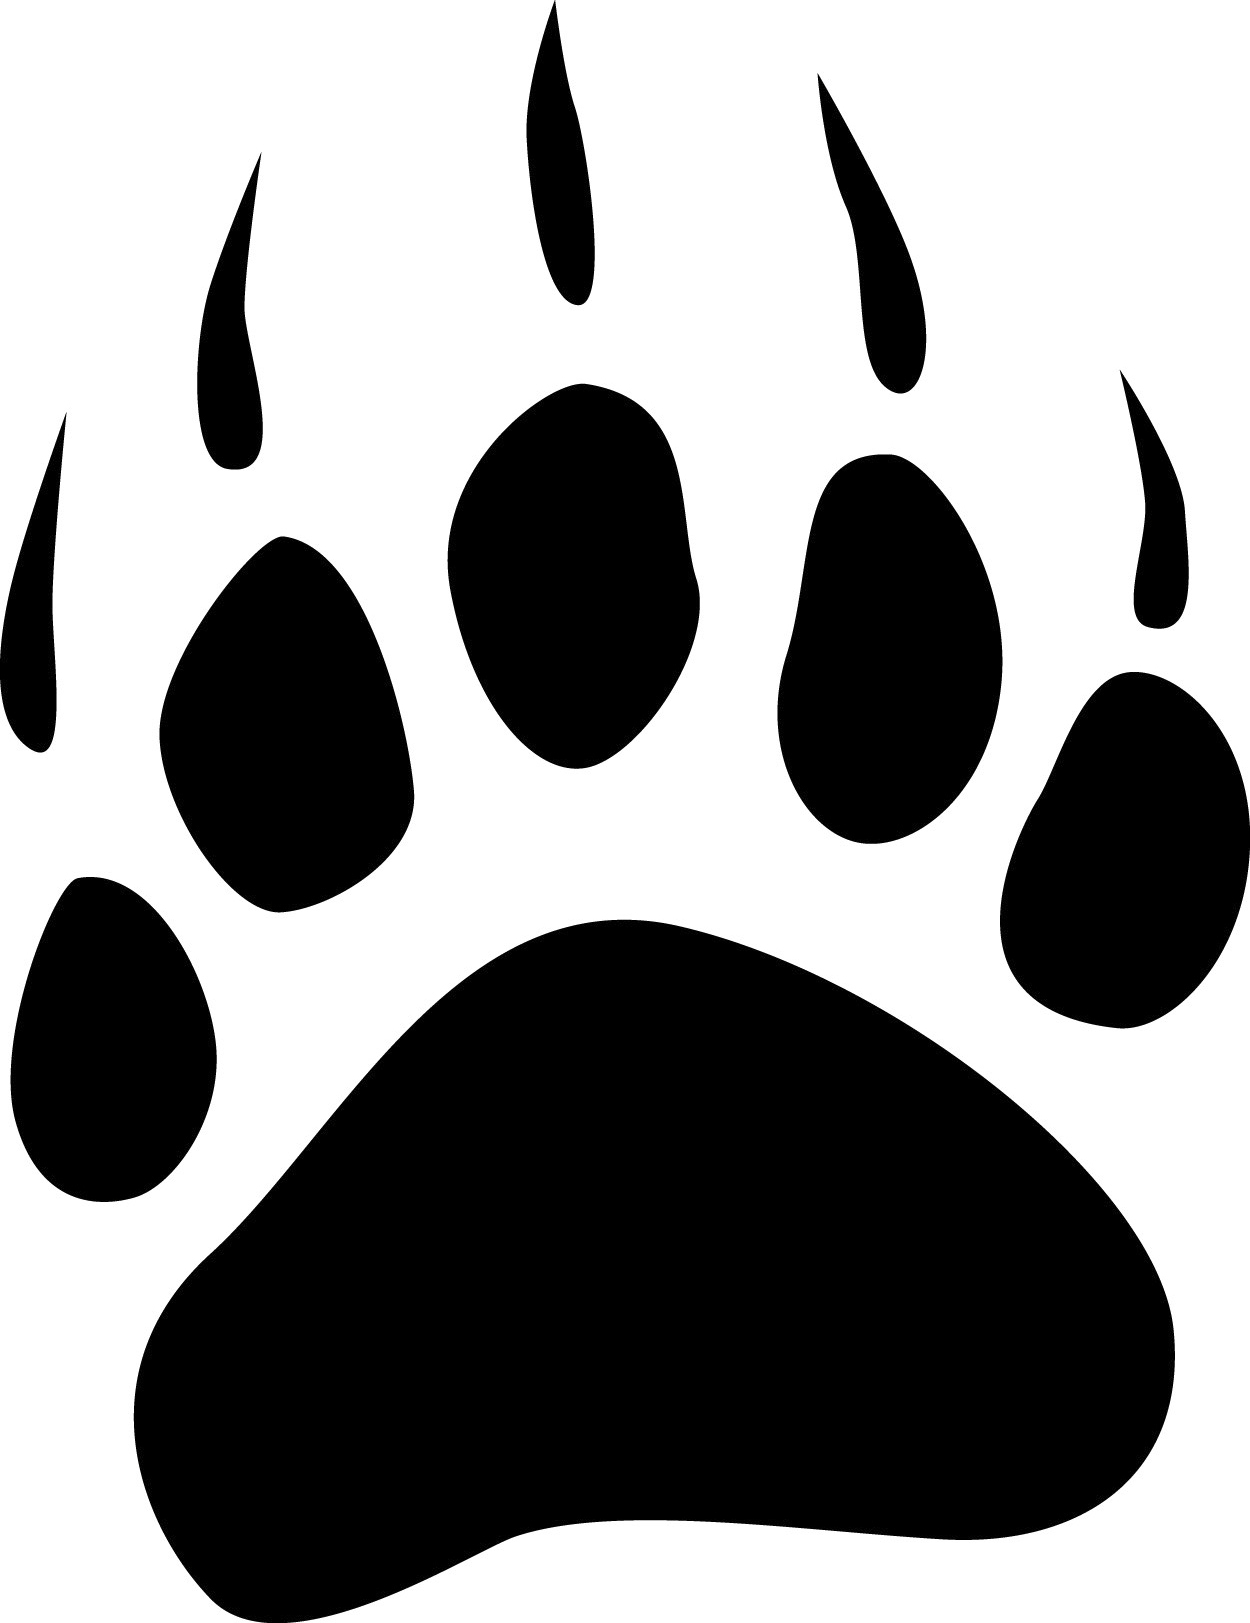 Bear Paw Print Celebrity Inspired Style Hair And Beauty